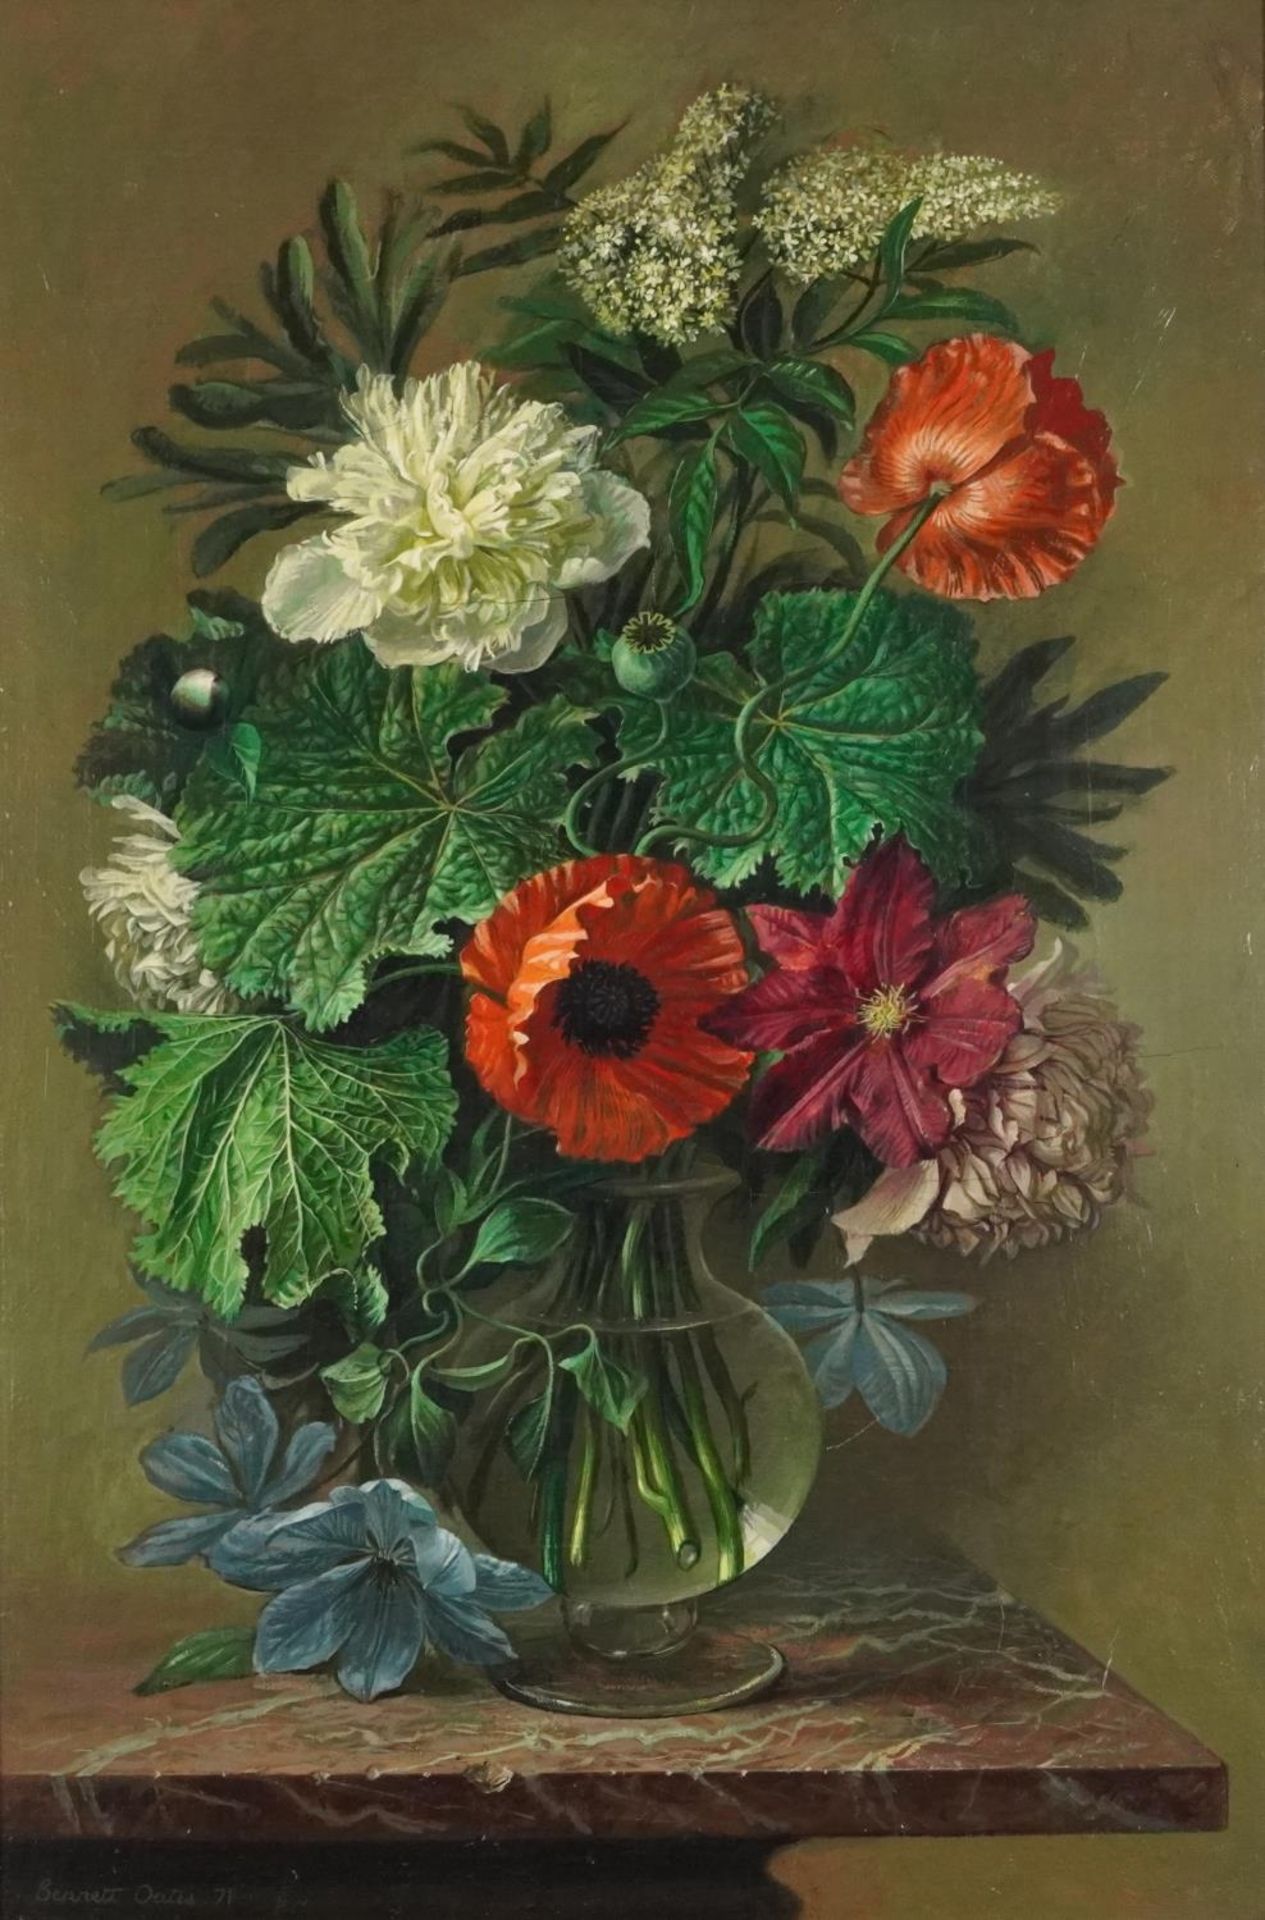 G Bennett Oates 1971 - Mixed flowers in a glass vase, oil on canvas, Stacy Marks inscribed label